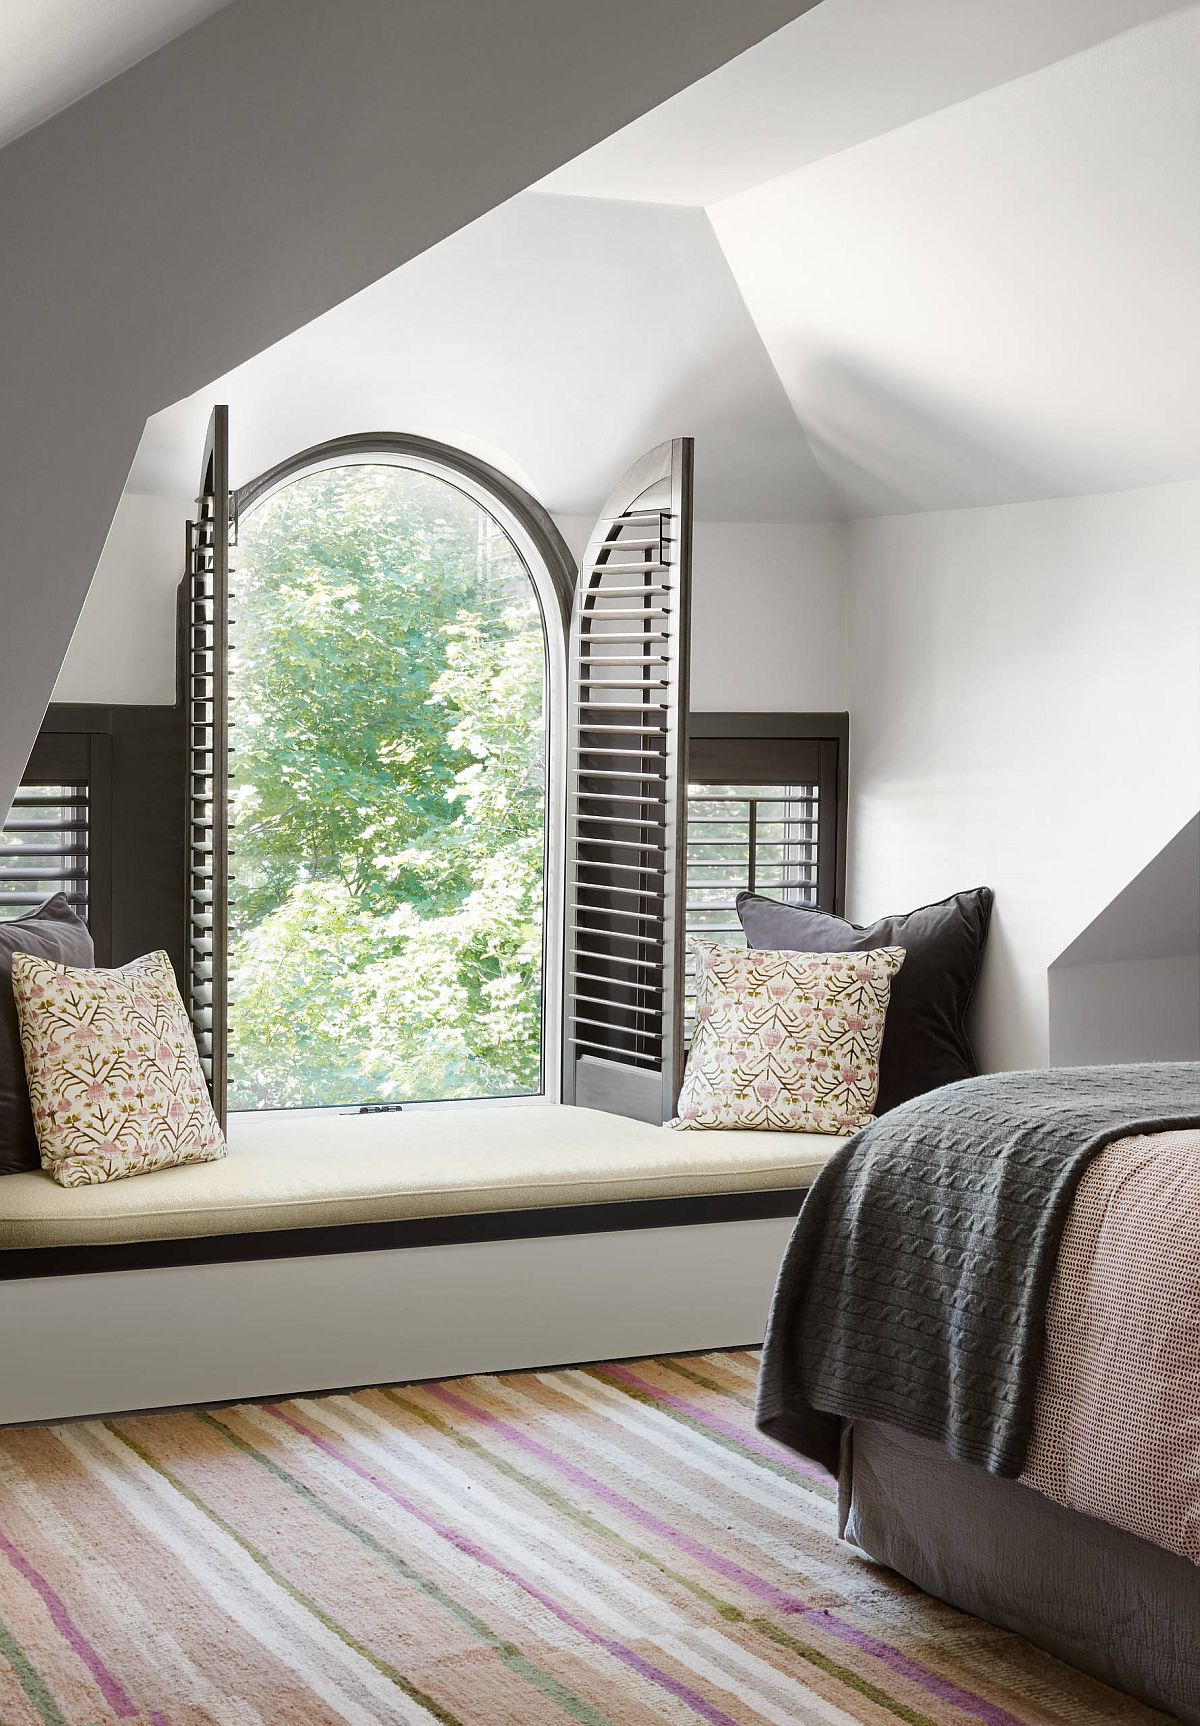 Window-seat-coupled-with-arched-window-gives-the-modern-bedroom-traditional-appeal-91009